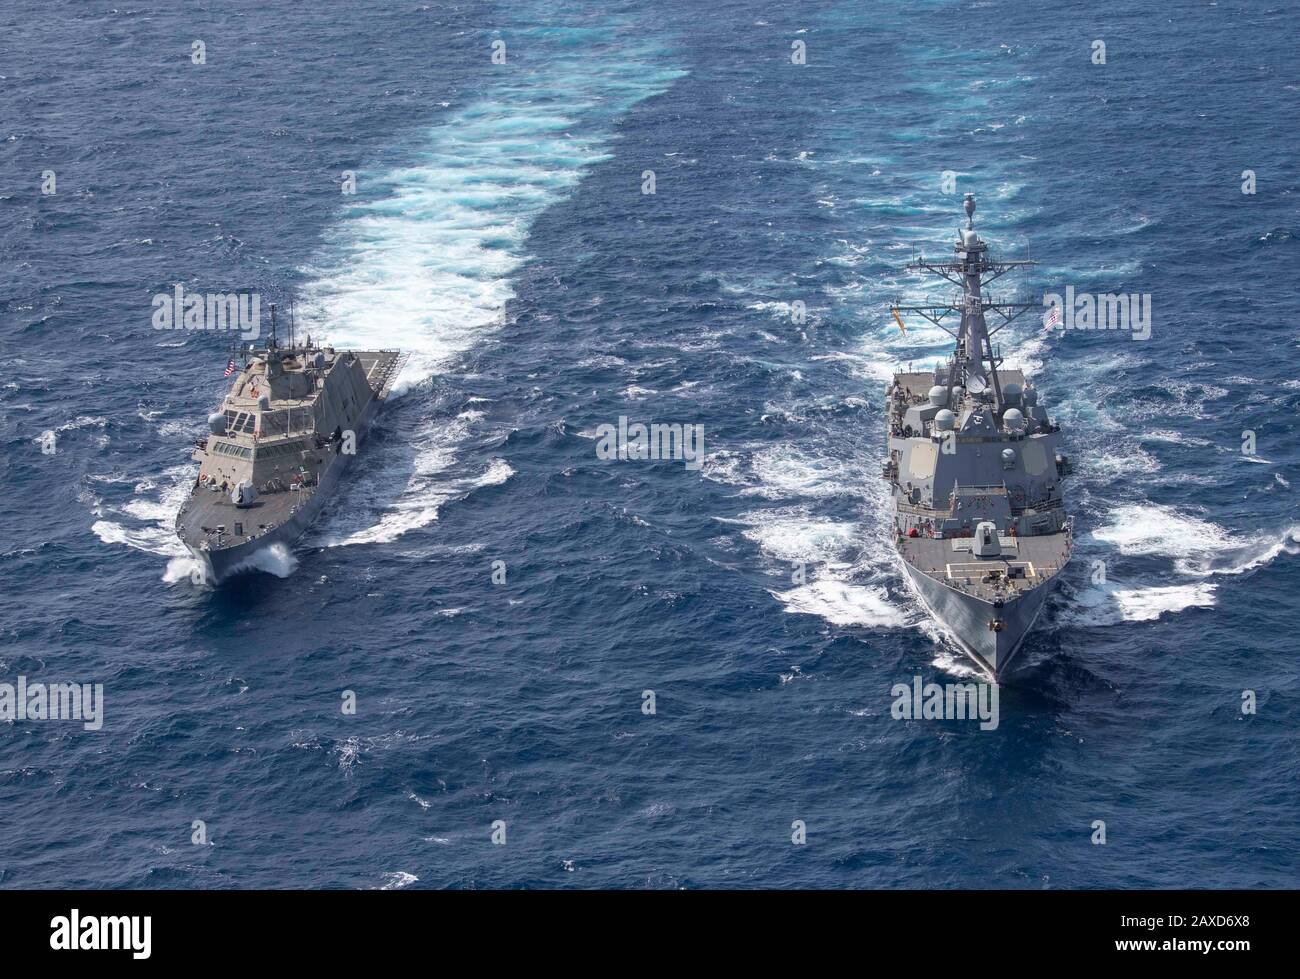 The U.S. Navy Arleigh Burke-class guided-missile destroyer USS Gridley, right, and the Freedom-variant littoral combat ship USS Detroit conduct maneuvering exercises during operations January 4, 2020 in the Atlantic Ocean. Stock Photo